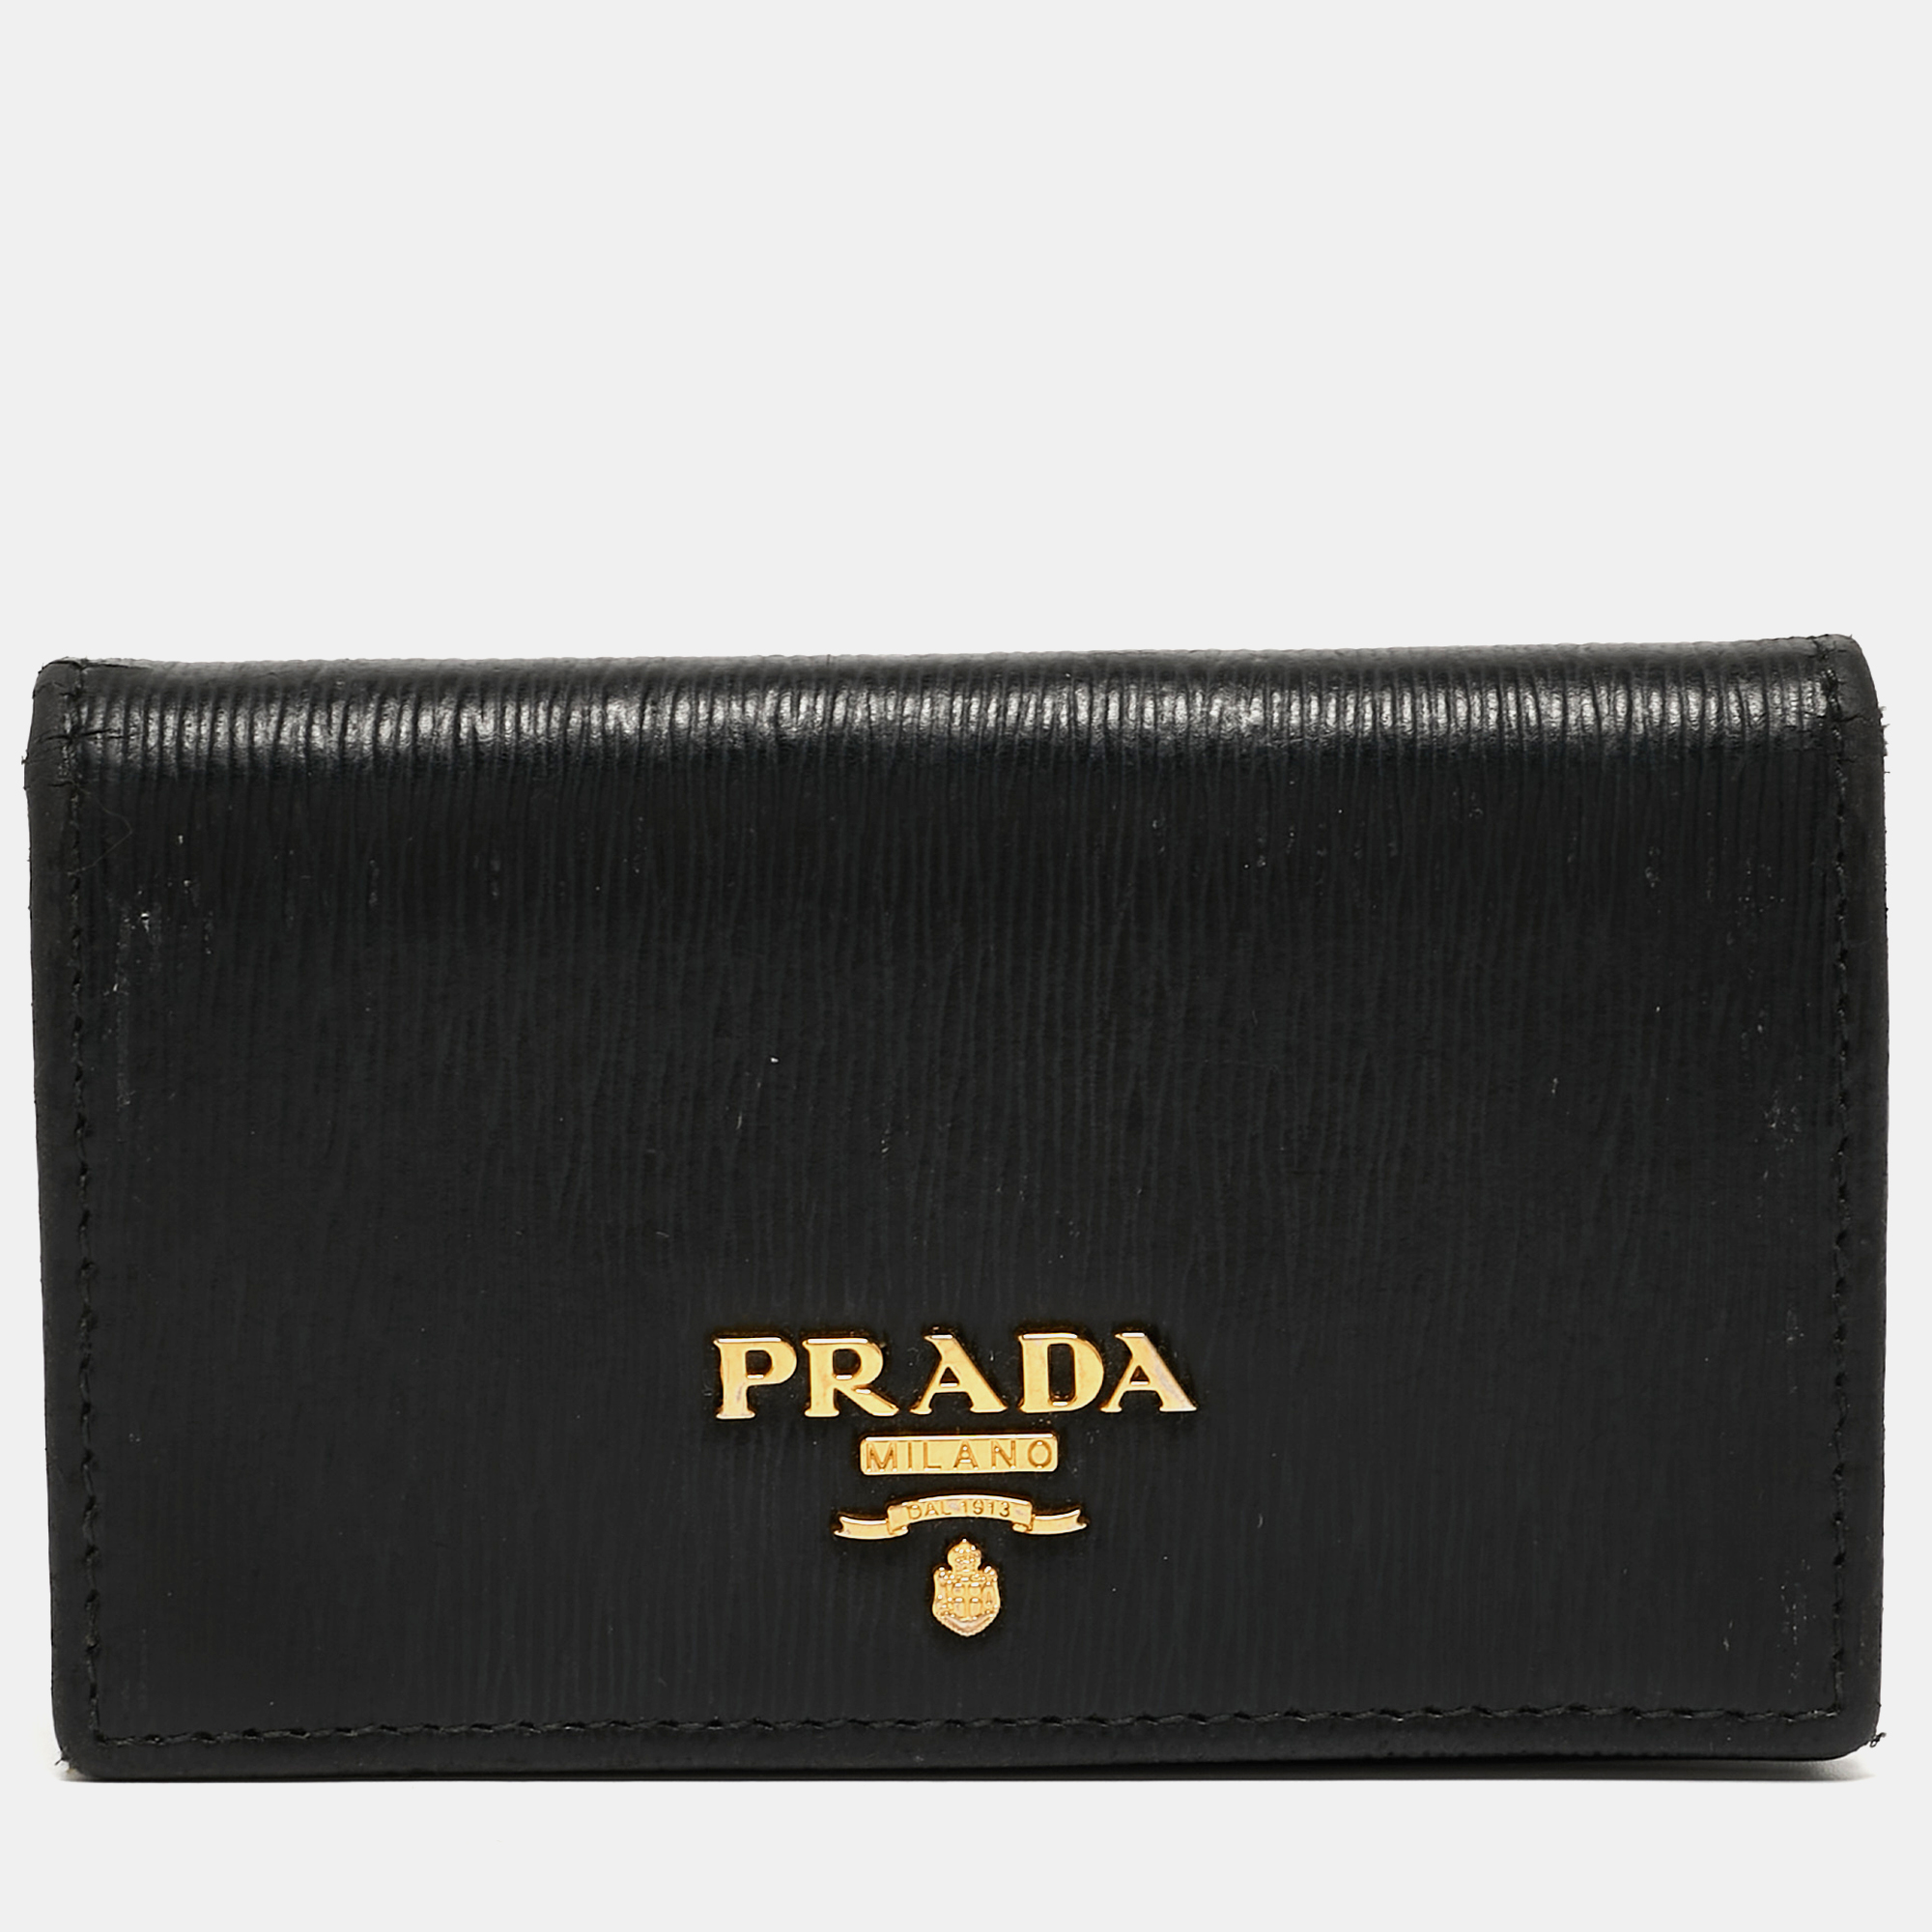 This card case from Prada will help you store your valuables securely. It is made from black Saffiano leather and flaunts a logo lettering on the front. This card case has gold tone hardware and opens to a leather nylon interior.